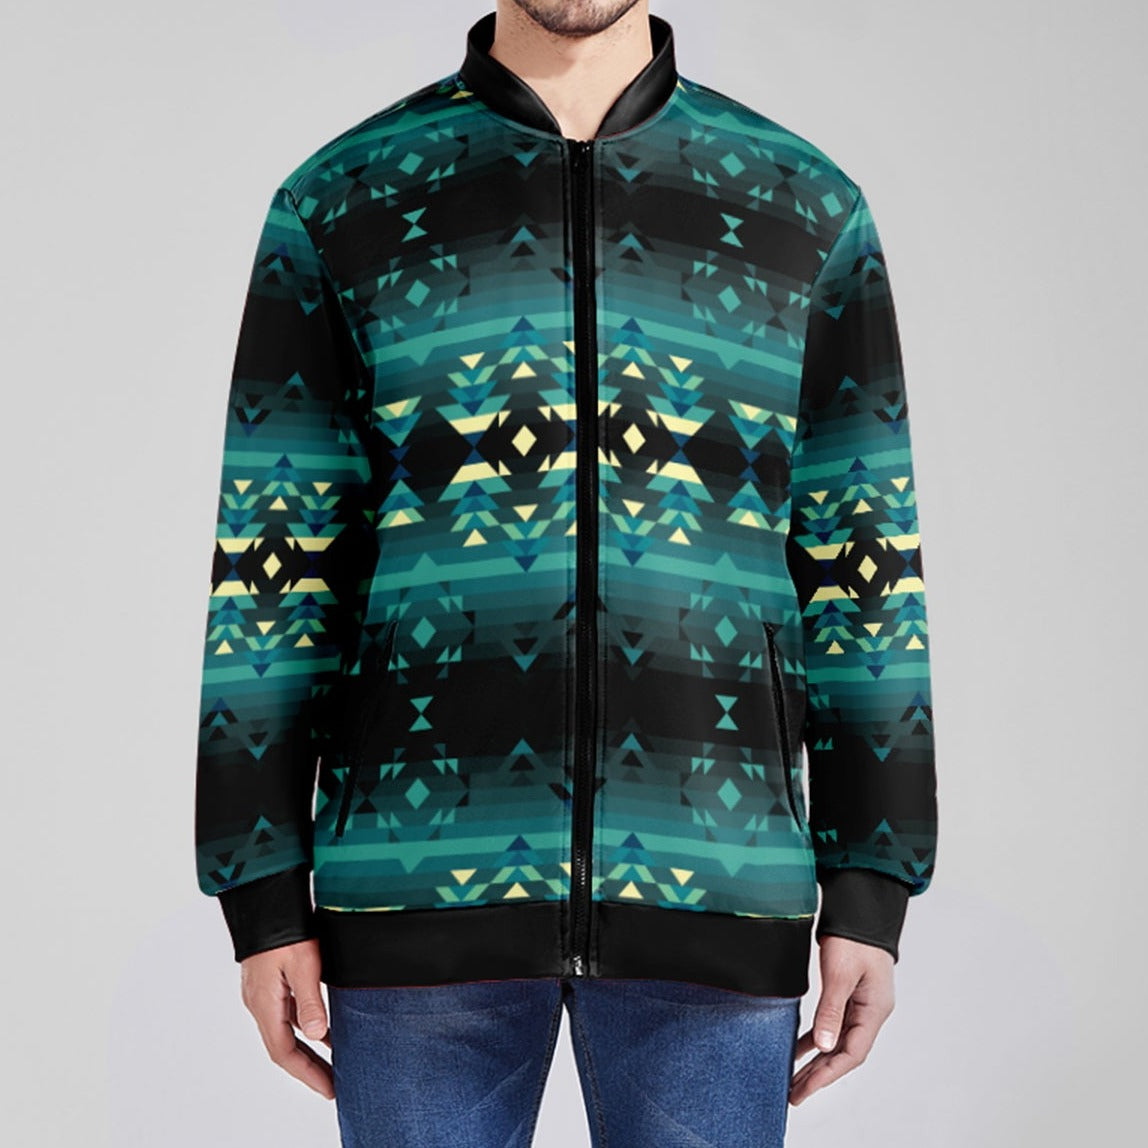 Inspire Green Youth Zippered Collared Lightweight Jacket